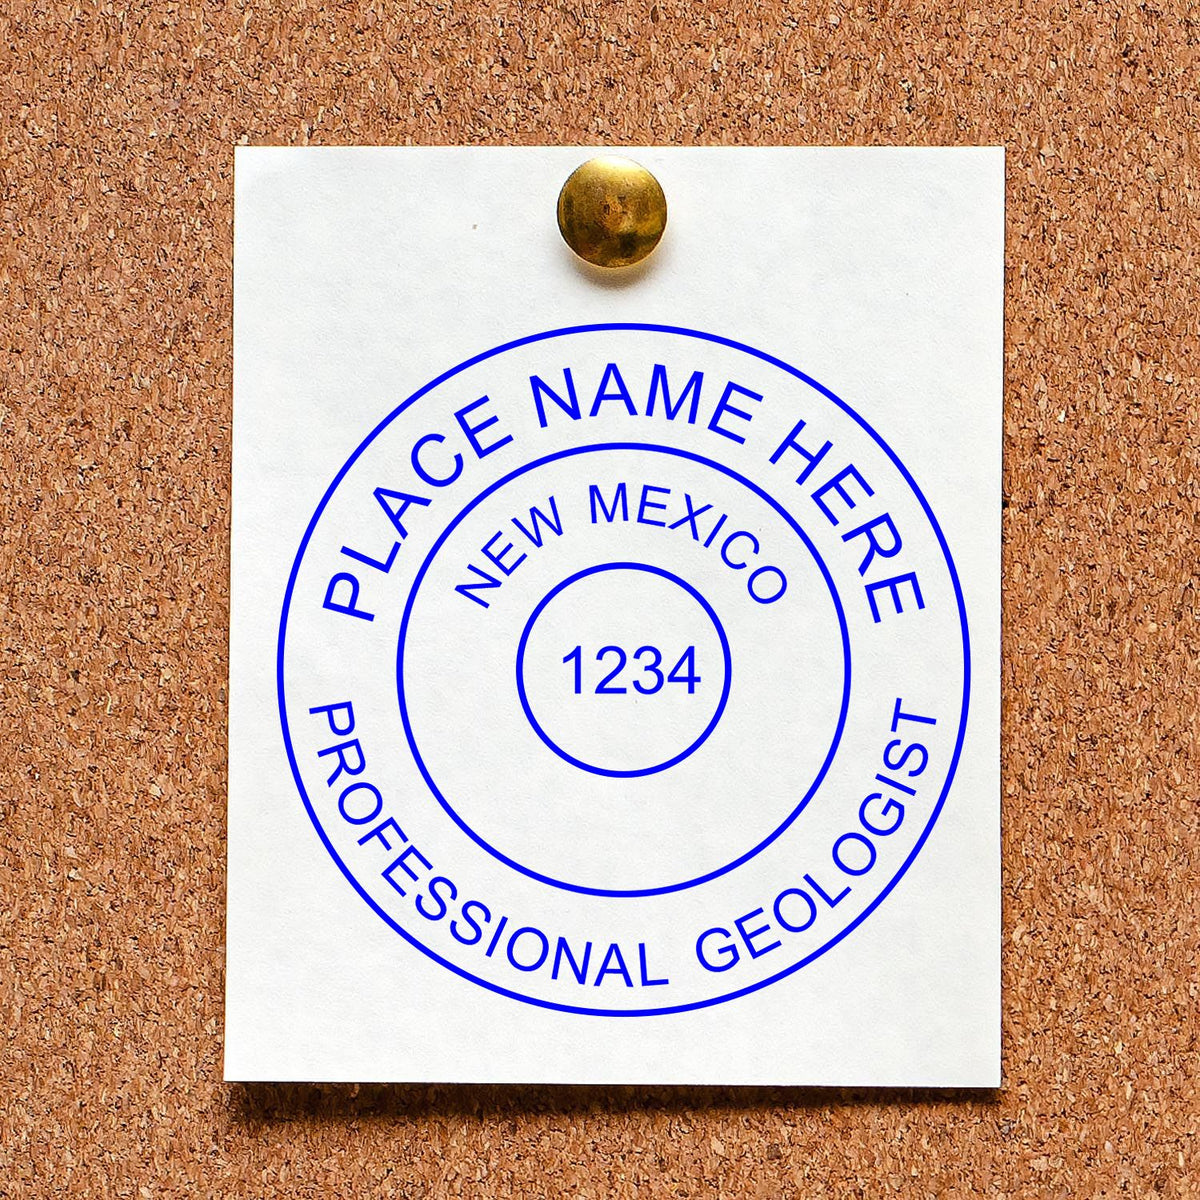 A lifestyle photo showing a stamped image of the Digital New Mexico Geologist Stamp, Electronic Seal for New Mexico Geologist on a piece of paper